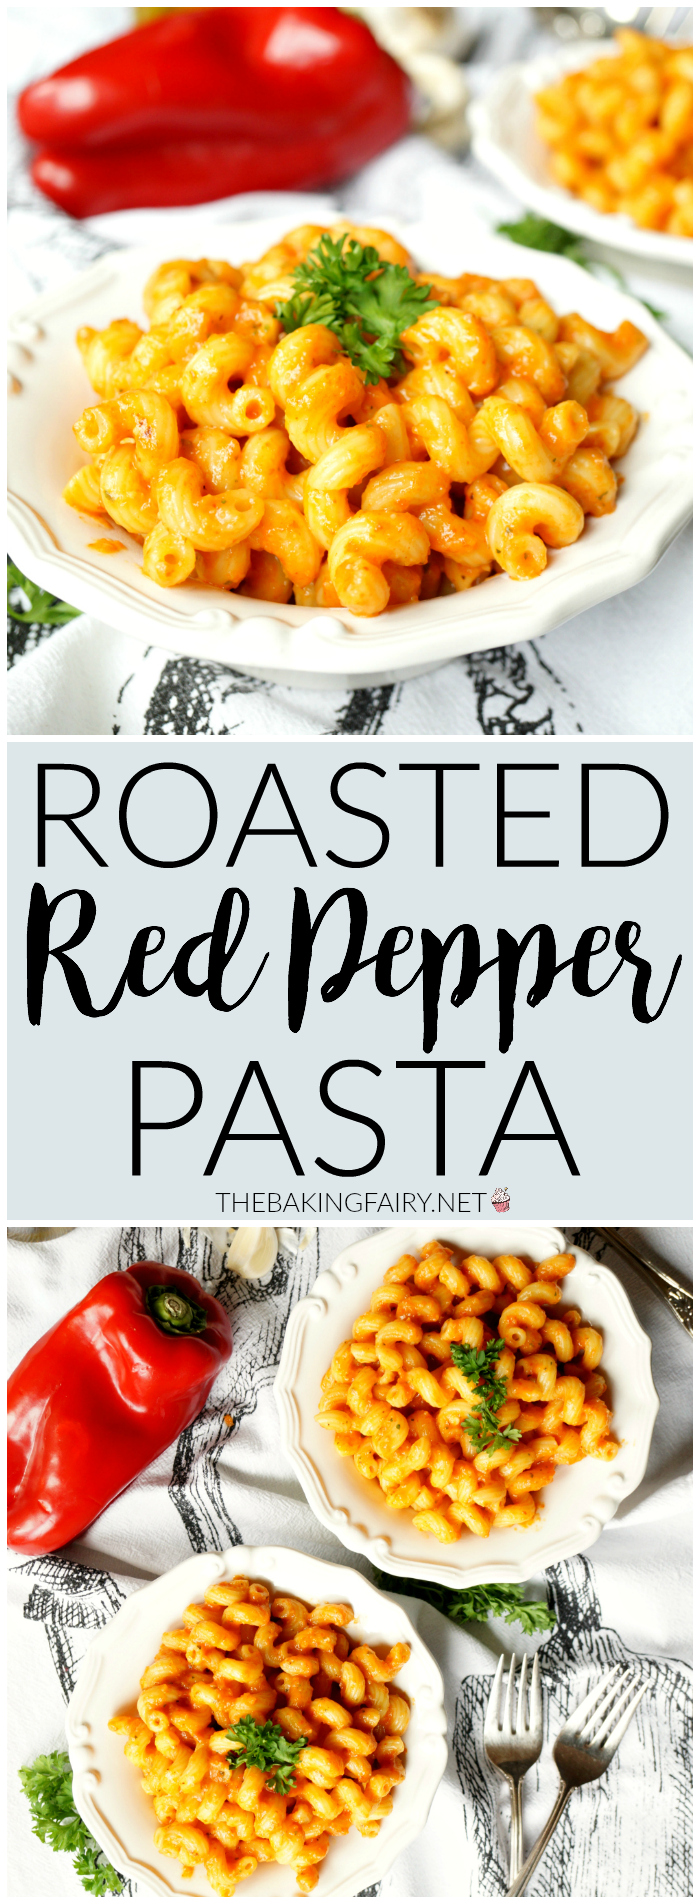 roasted red pepper pasta | The Baking Fairy